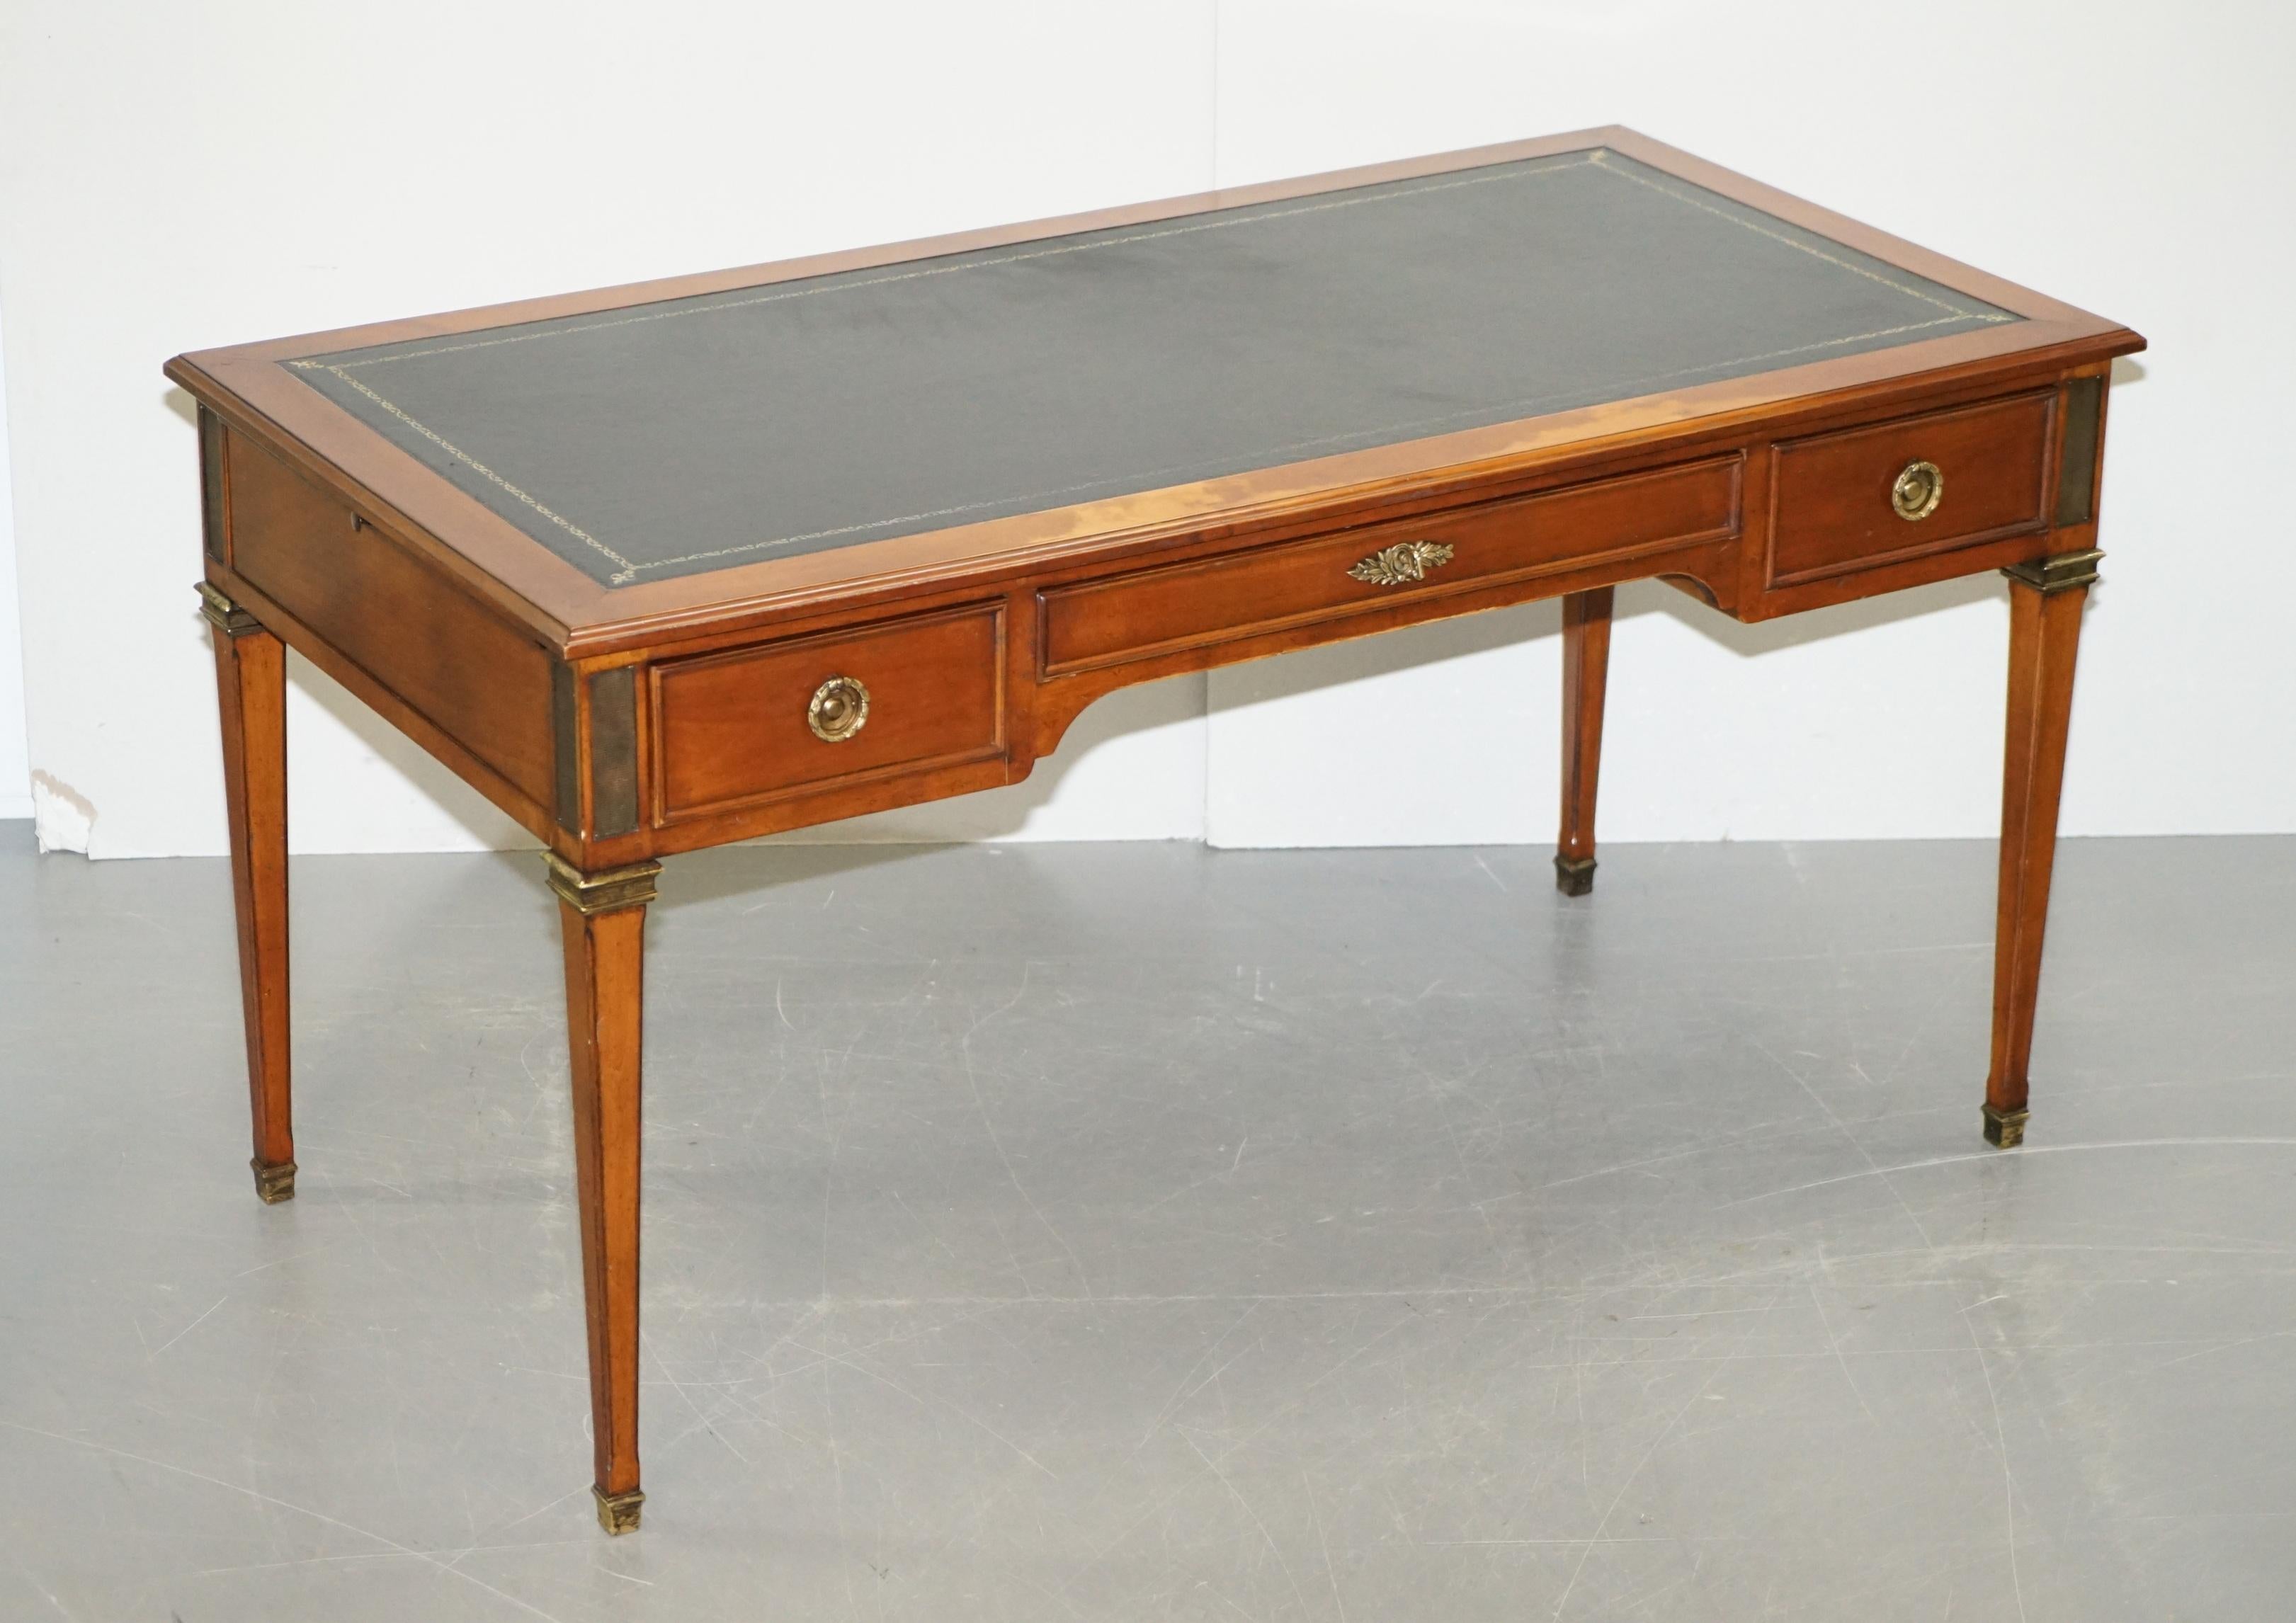 We are delighted to offer for sale this stunning Napoleon III French Empire style Bureau De Plat desk with extending leather tops

A very decorative and collectable desk in lightly restored condition throughout. The desk comes complete with all